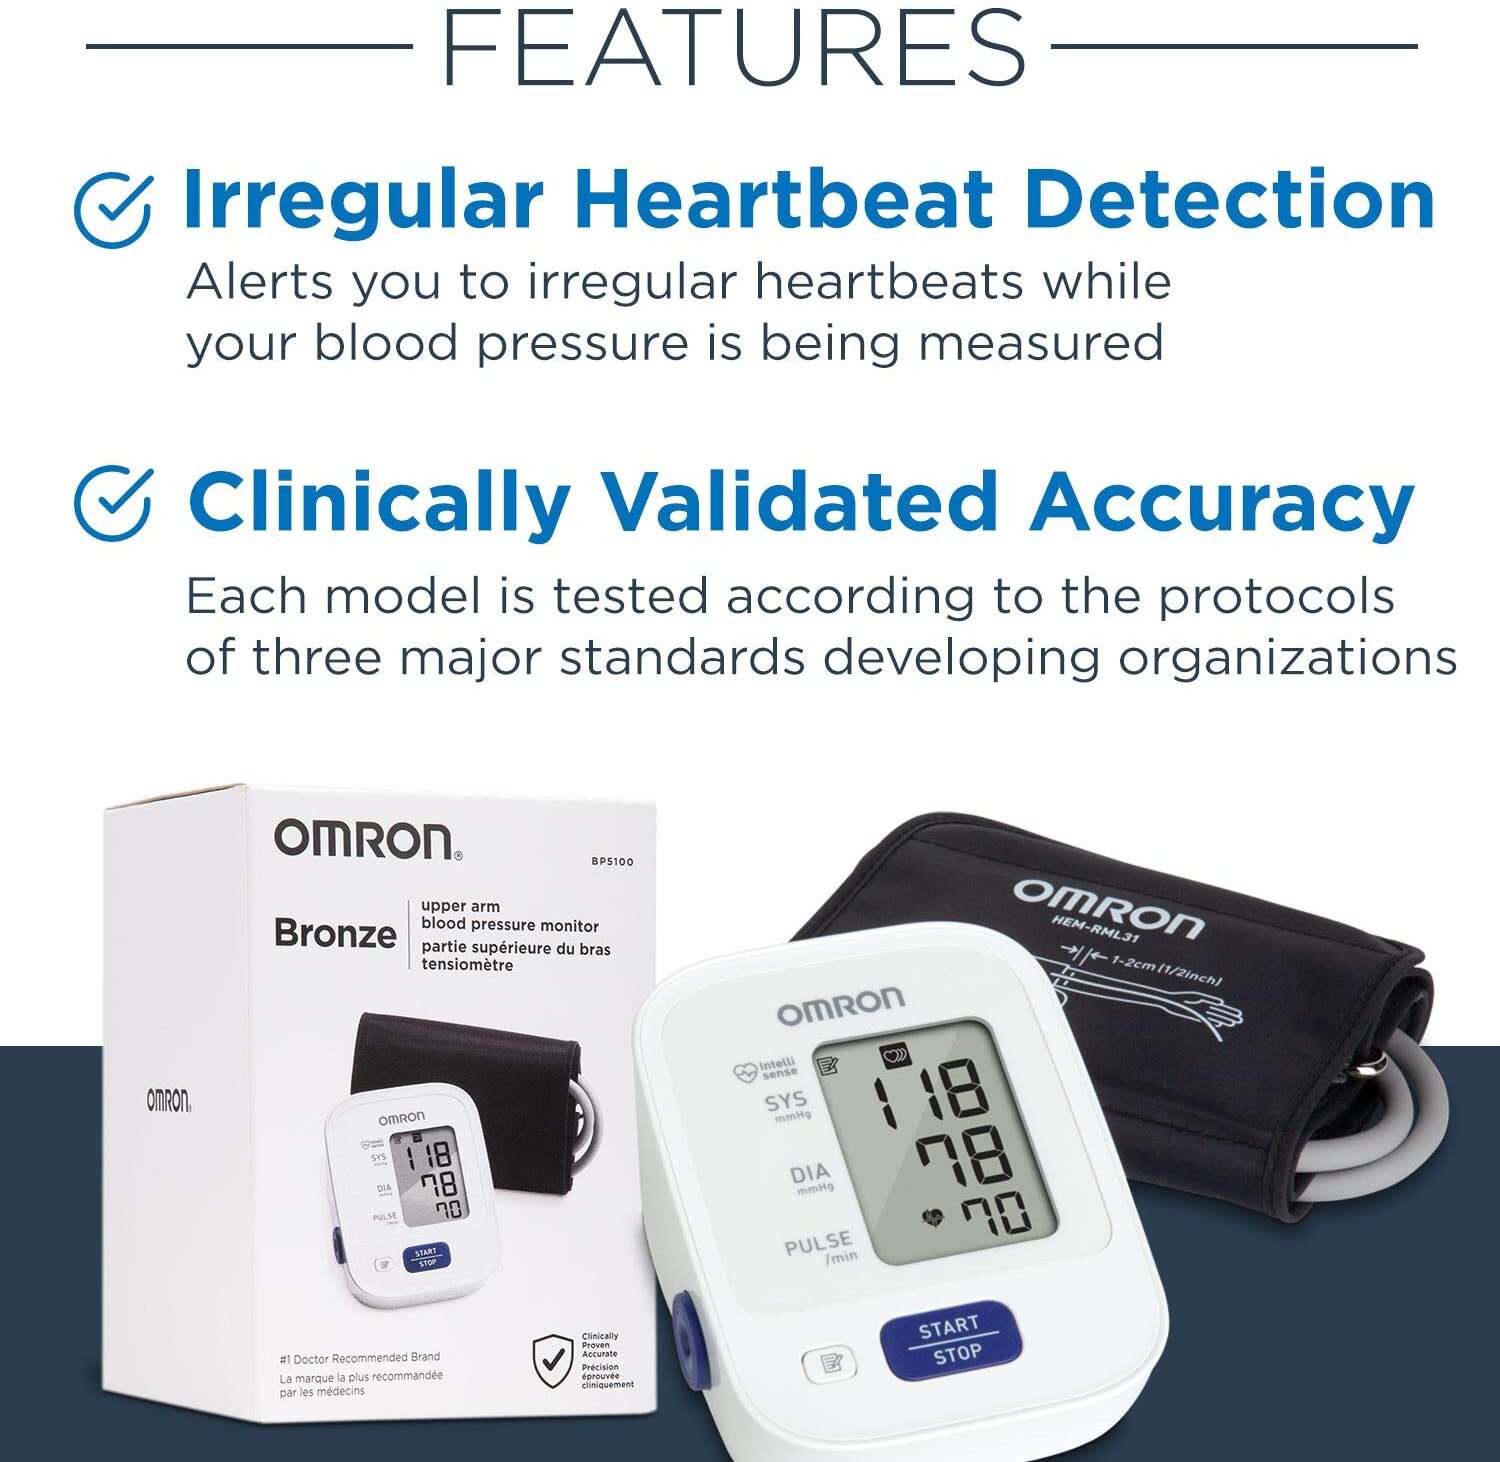 OMRON Silver Blood Pressure Monitor | Wireless, Upper-Arm